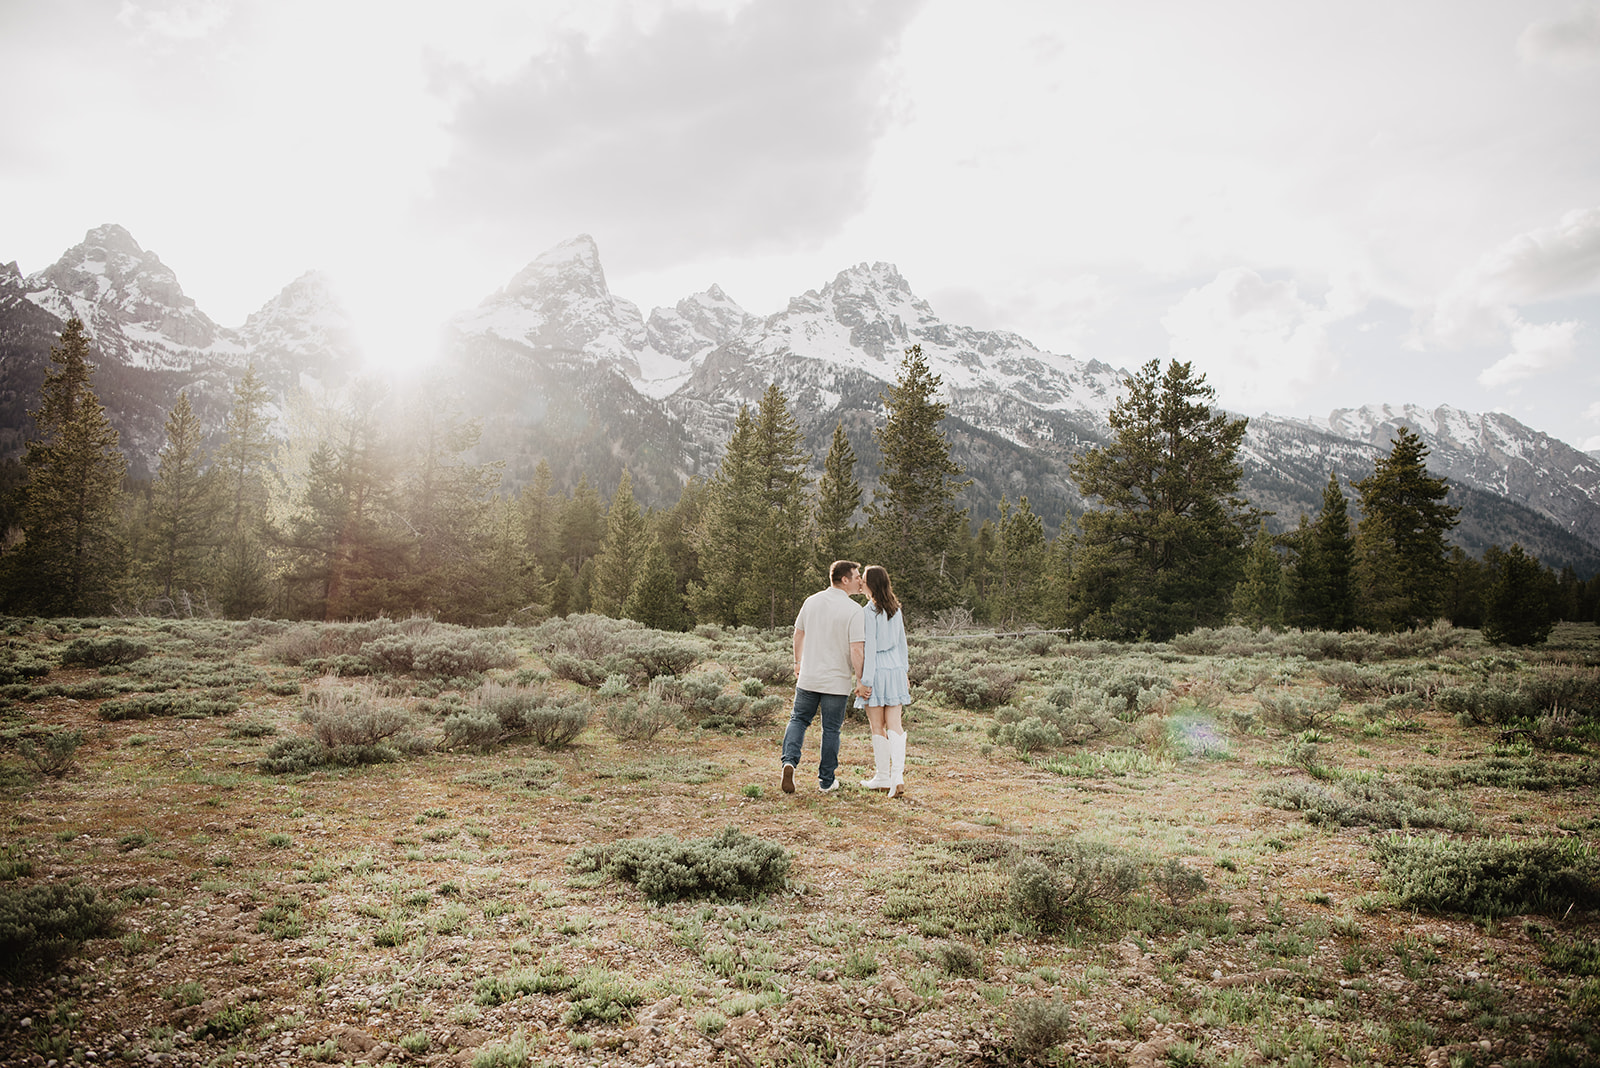 Jackson Hole Wedding photographers captured bride and groom at sun set walking and kissing in a sage brush field